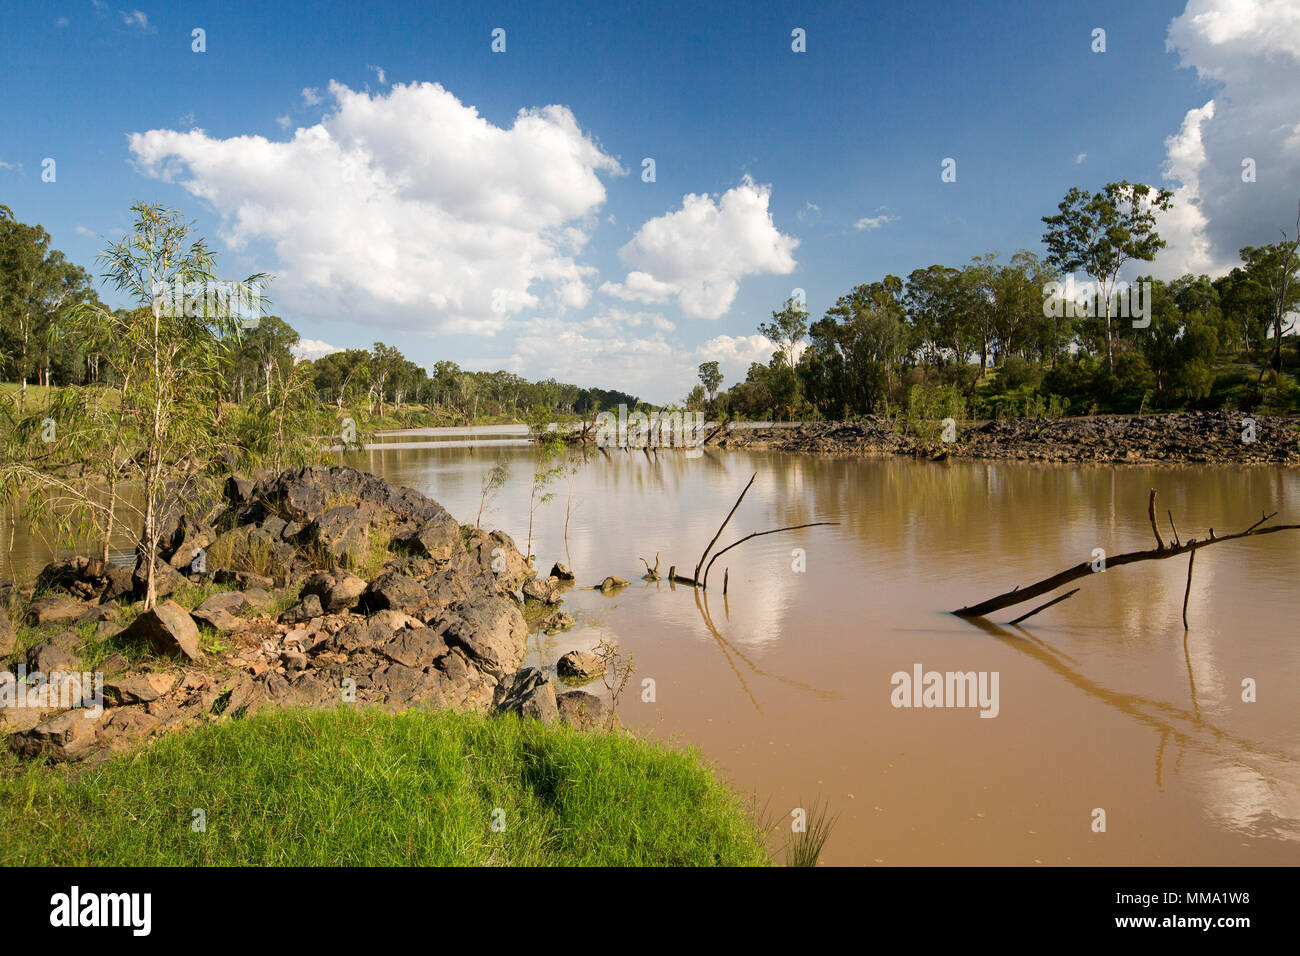 Colourful landscape with calm waters of Fitzroy River hemmed with tall trees and emerald grass under blue sky in central Queensland Australia Stock Photo